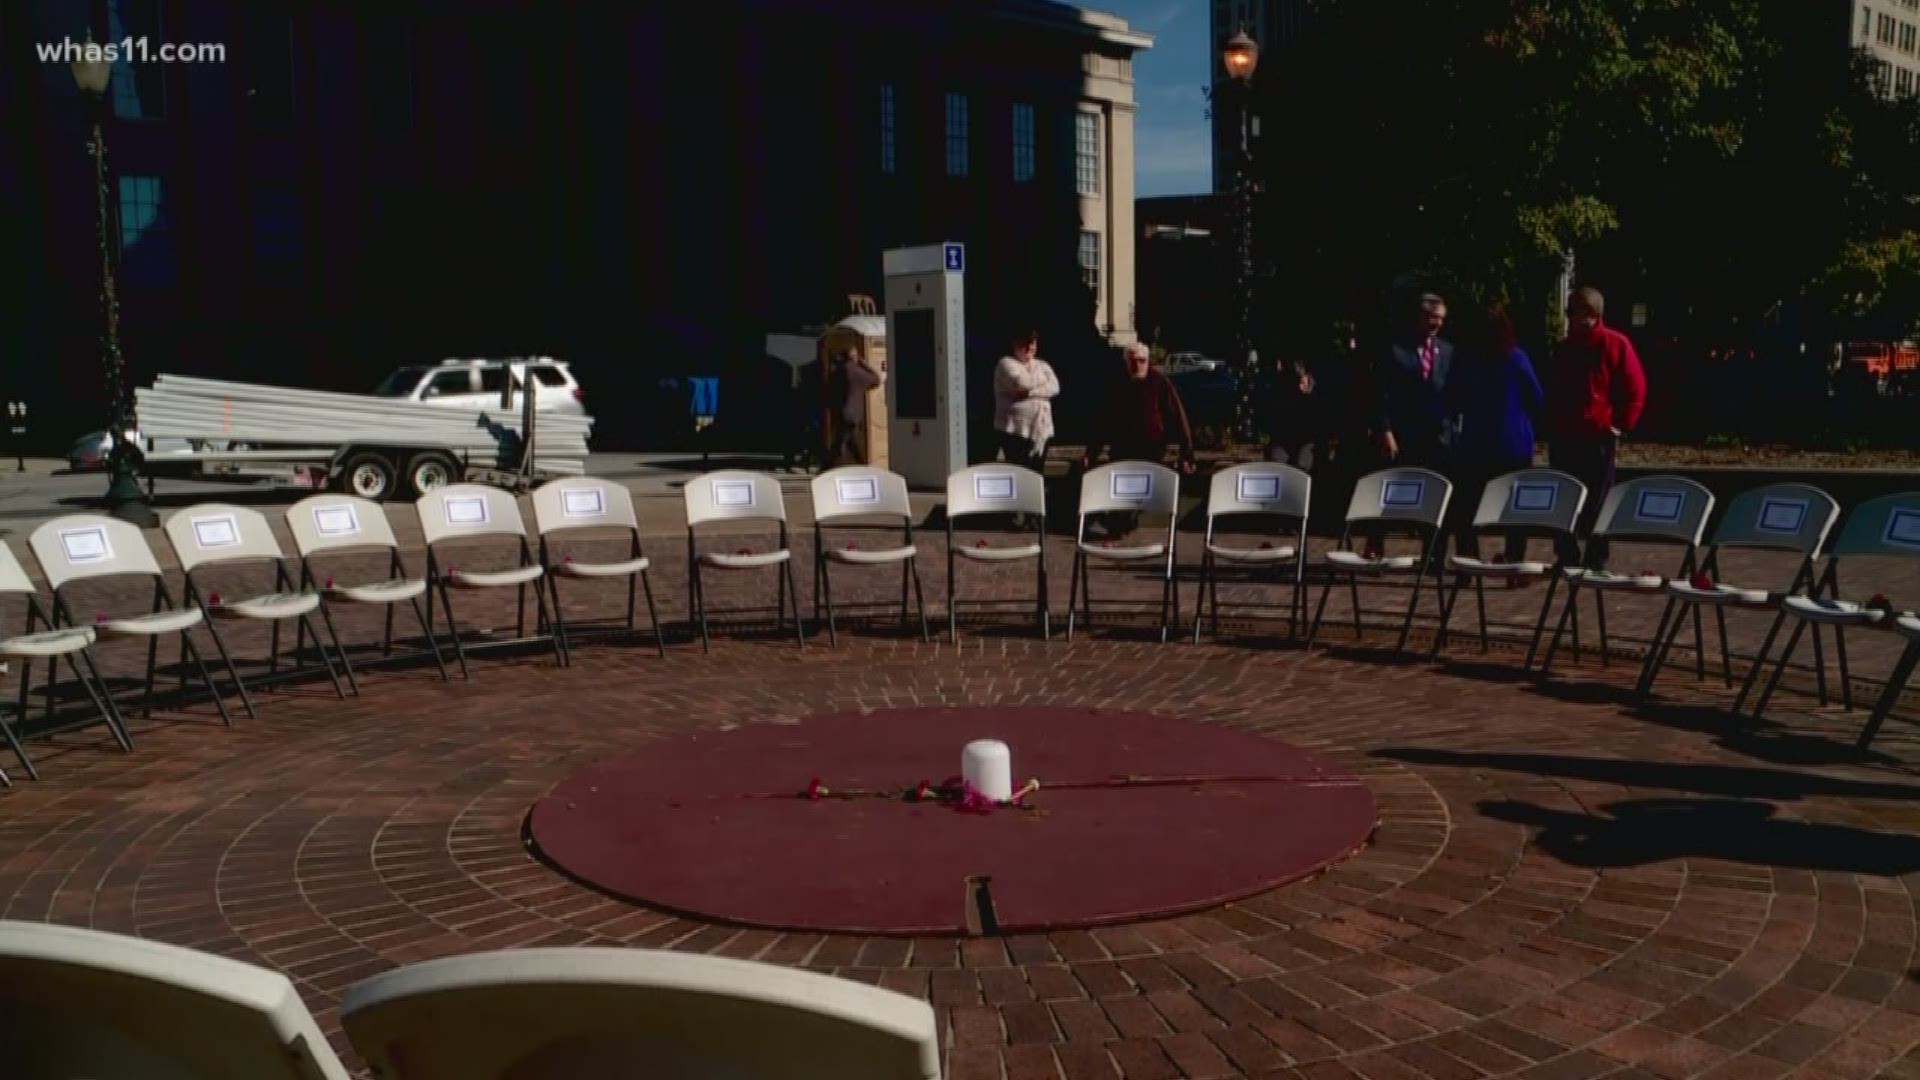 Twenty-seven names were read aloud to honor those lives lost to domestic violence.